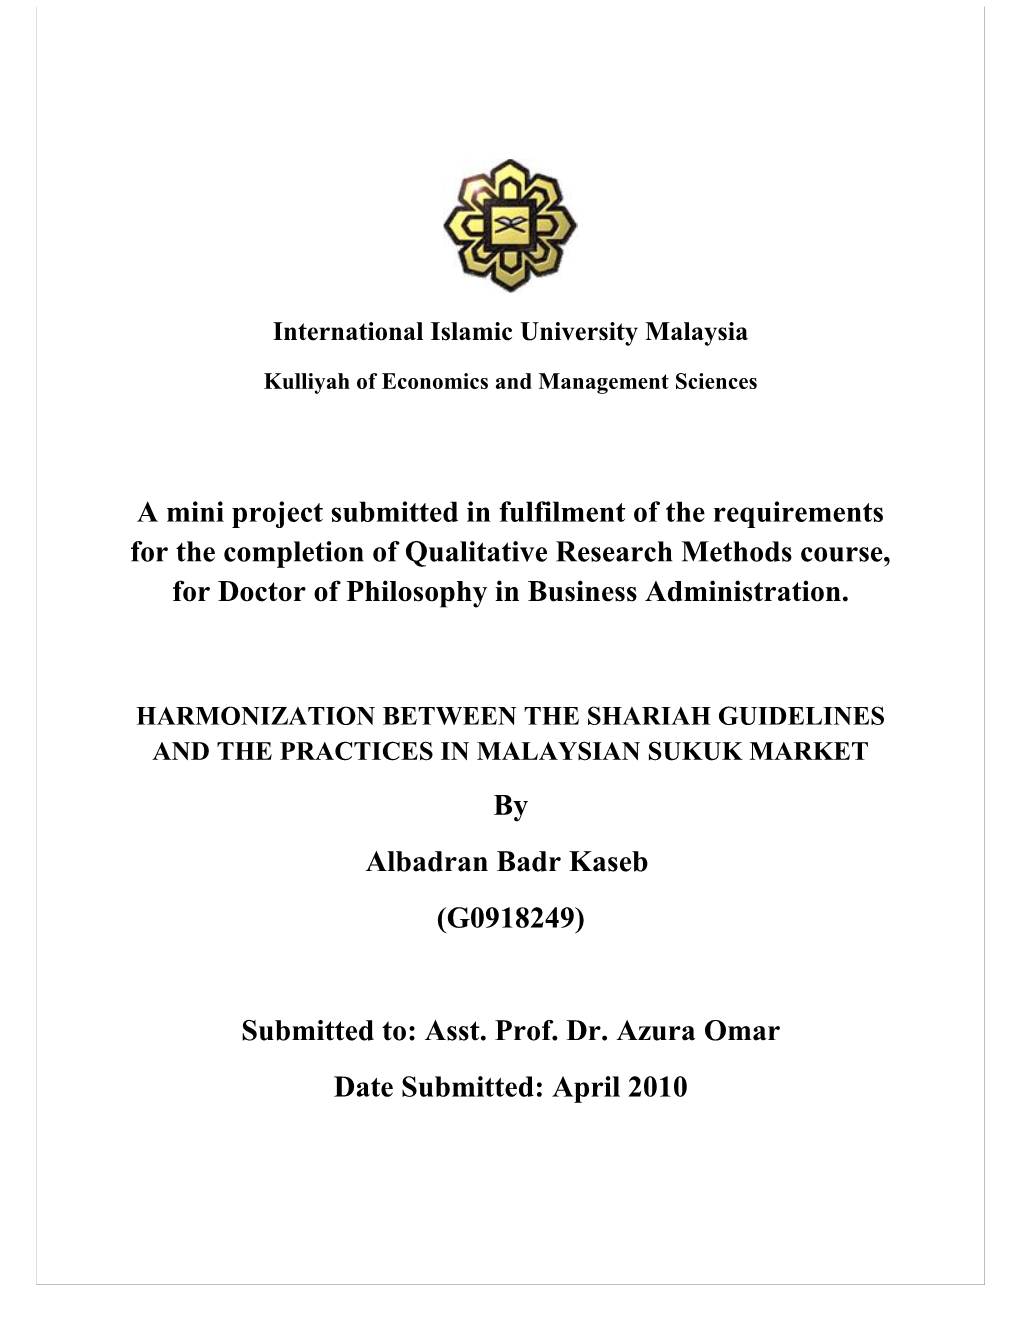 Harmonization Between the Shariah Guidelines and the Practices in Malaysian Sukuk Market